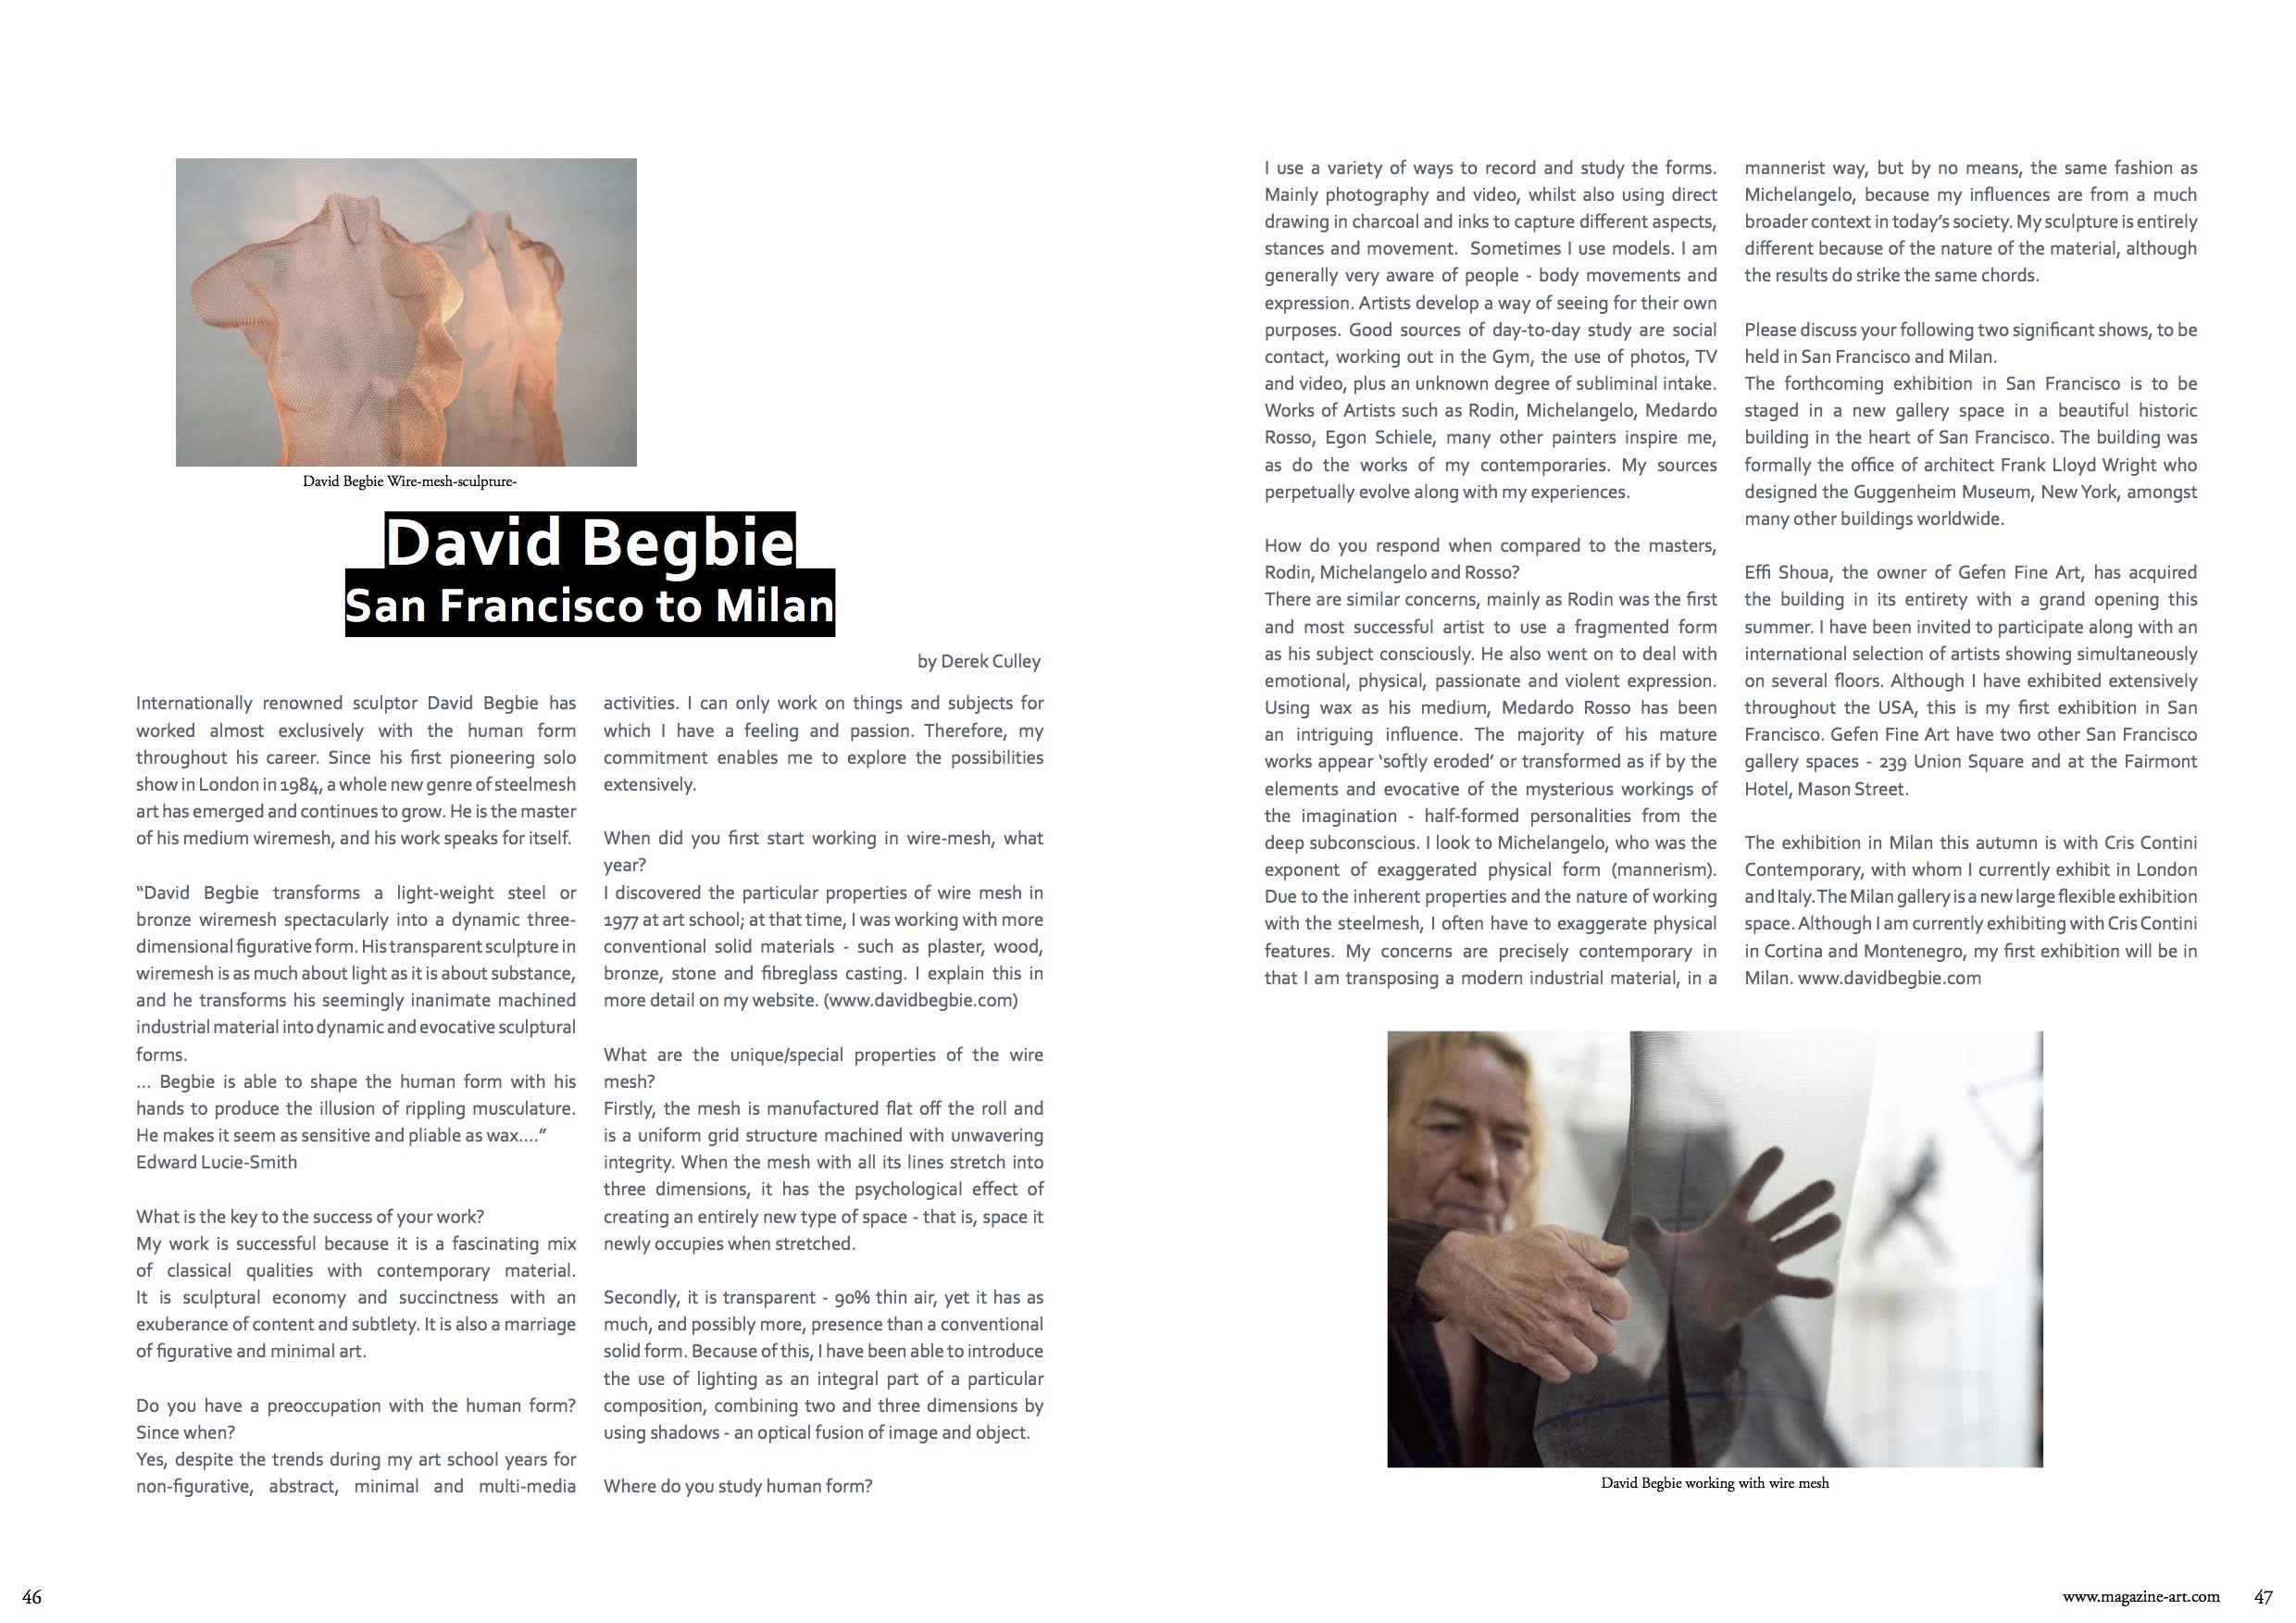 Double magazine page with artist interview 2021